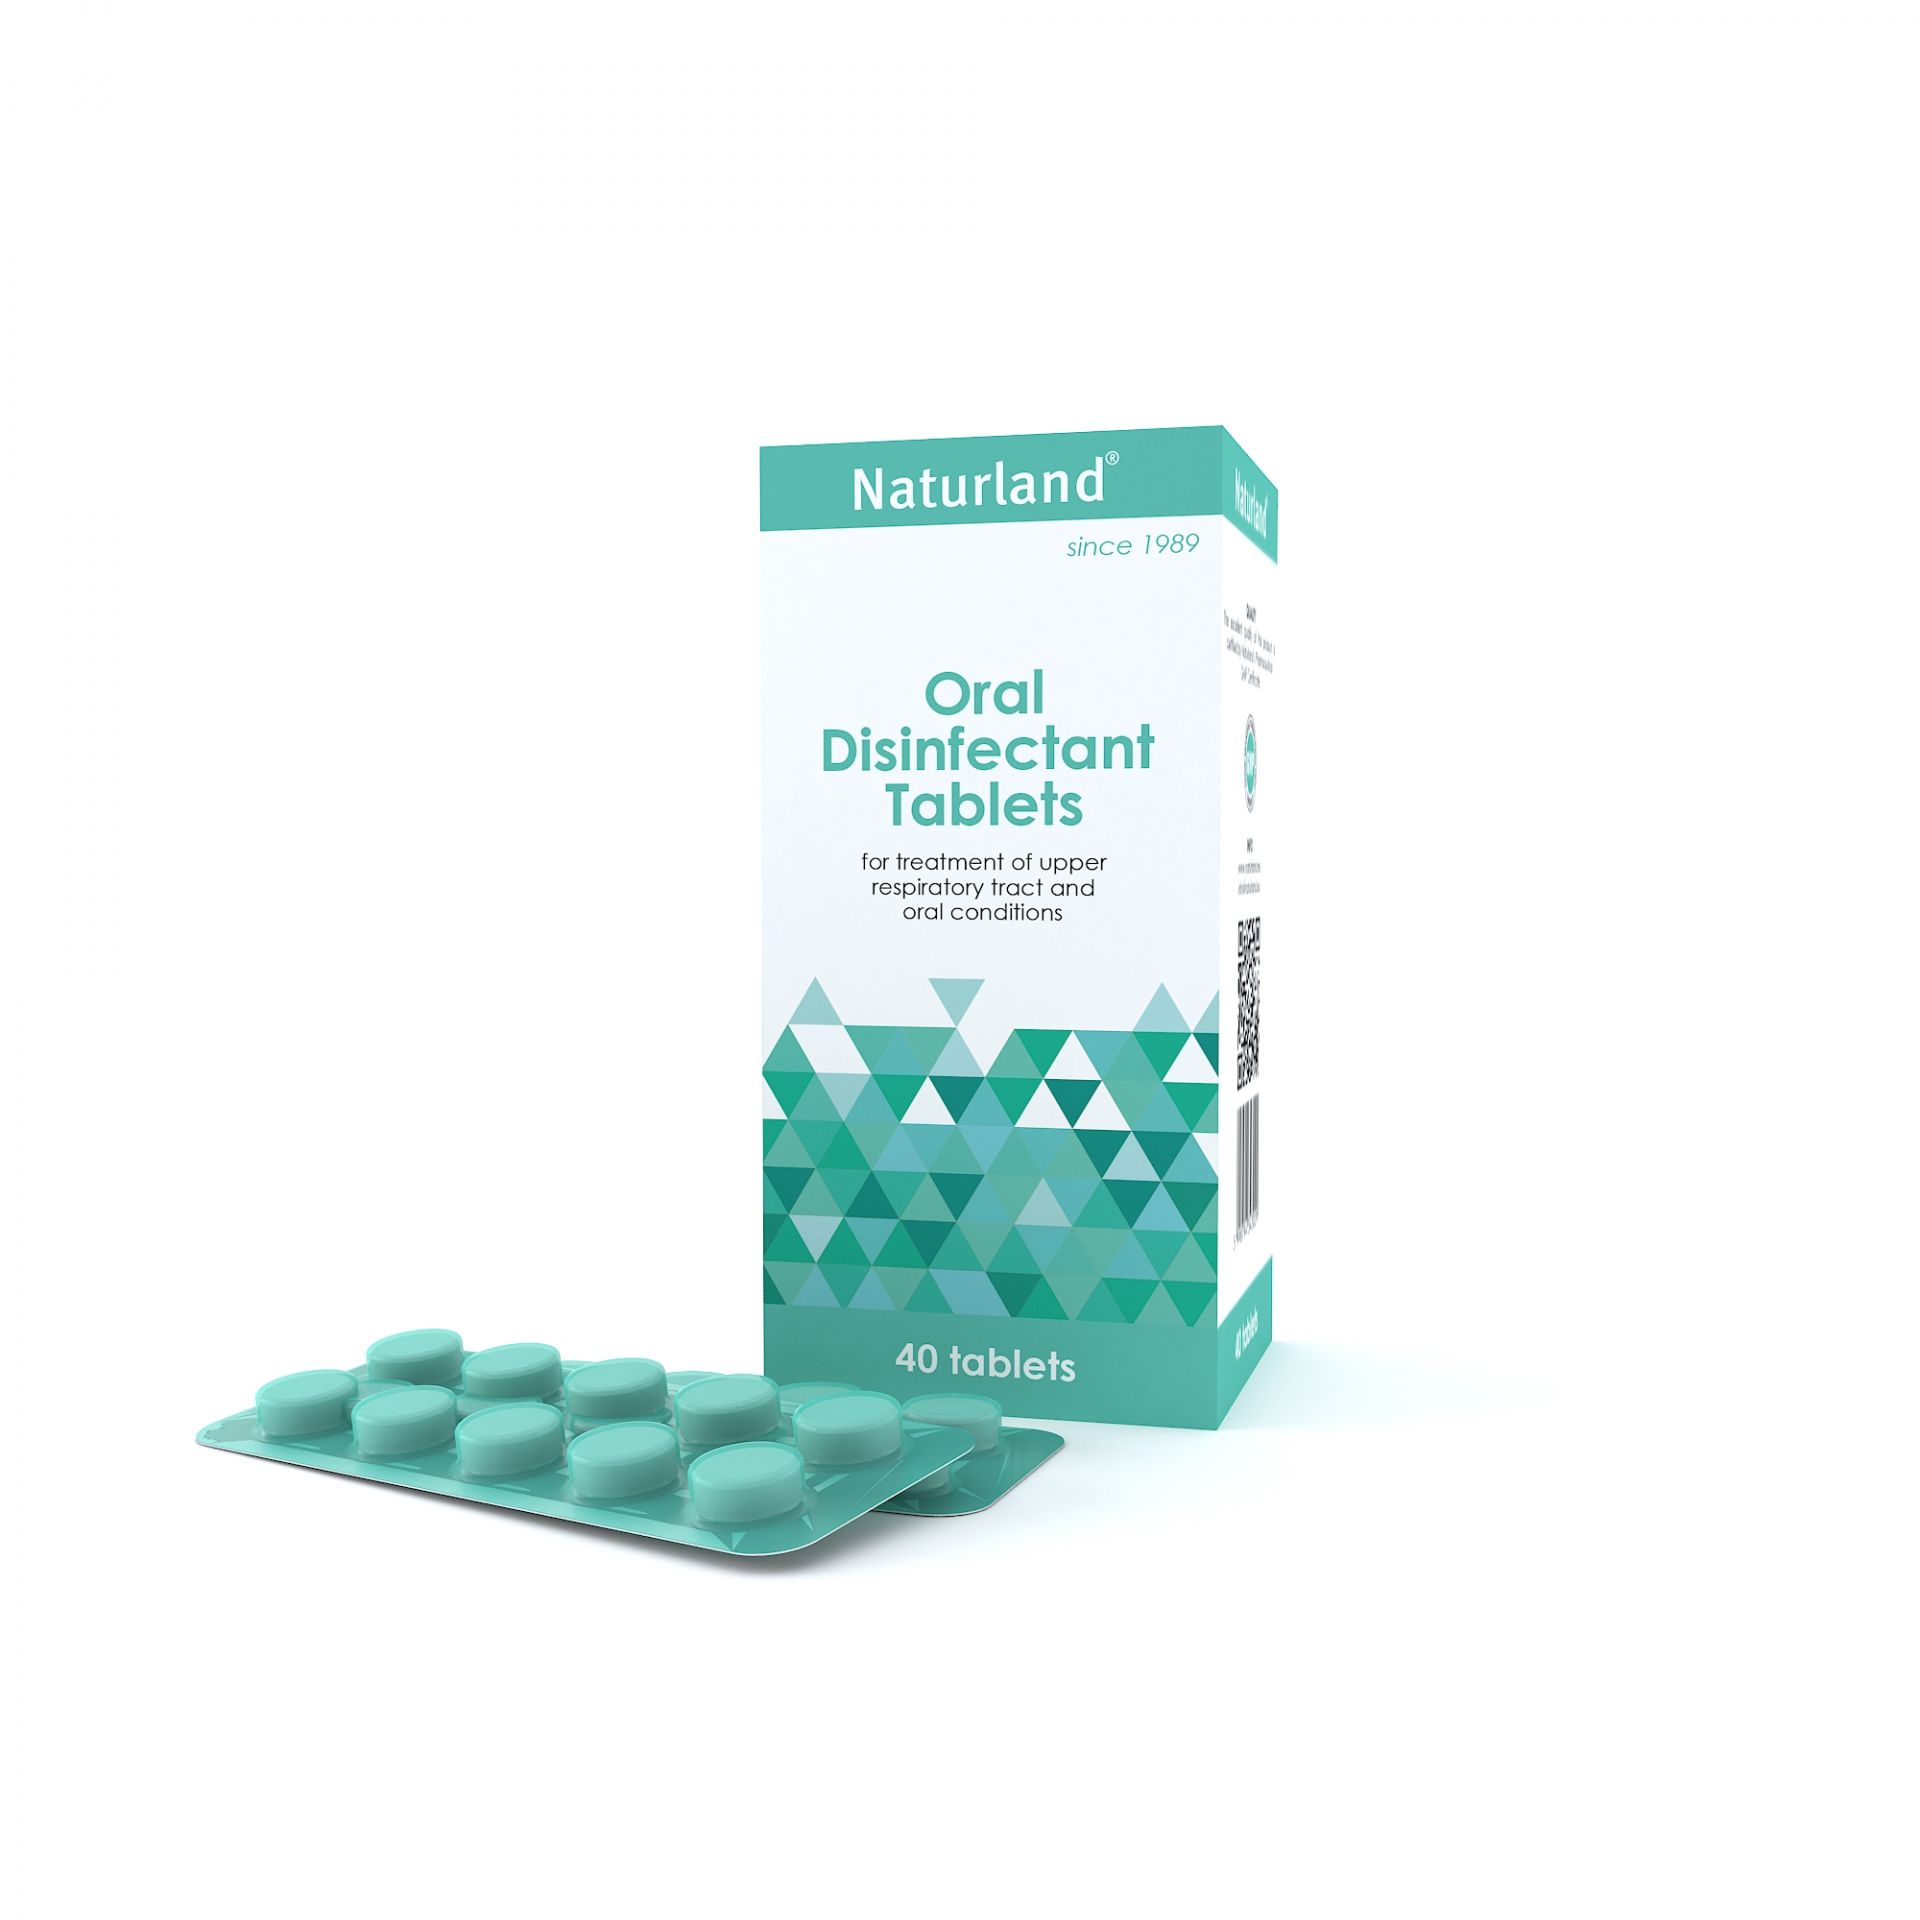 Naturland oral disinfectant tablets